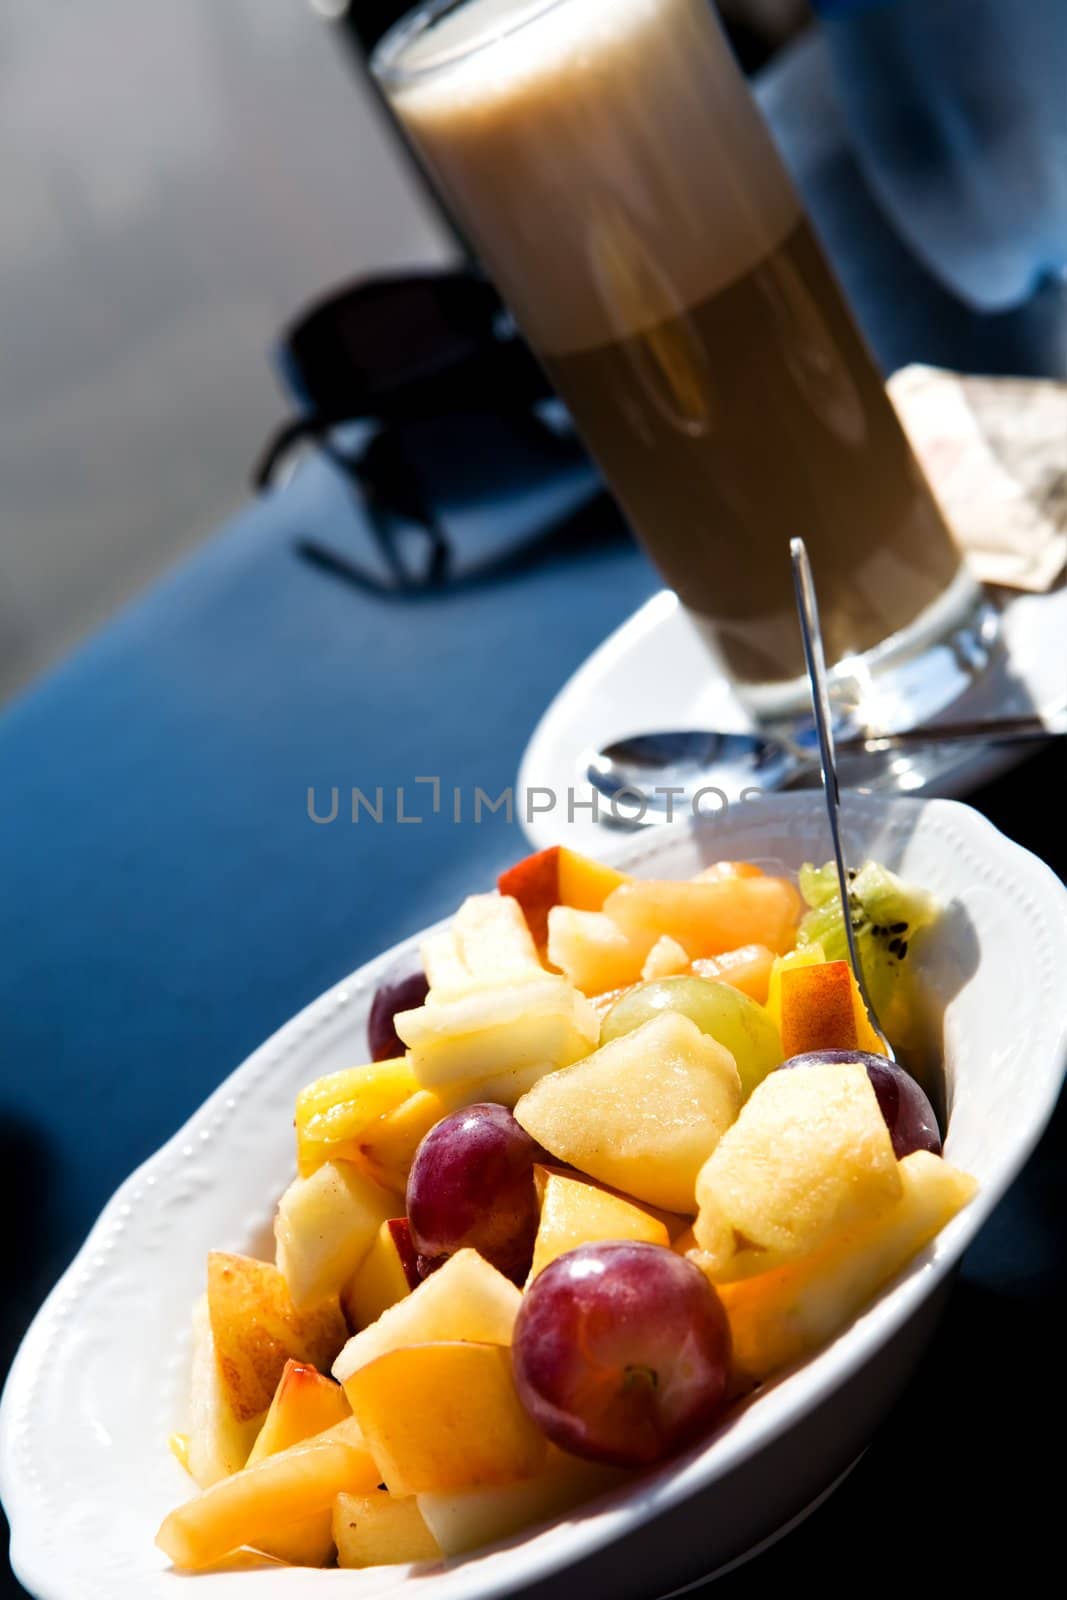 Fruit salad and coffee latte outdoors